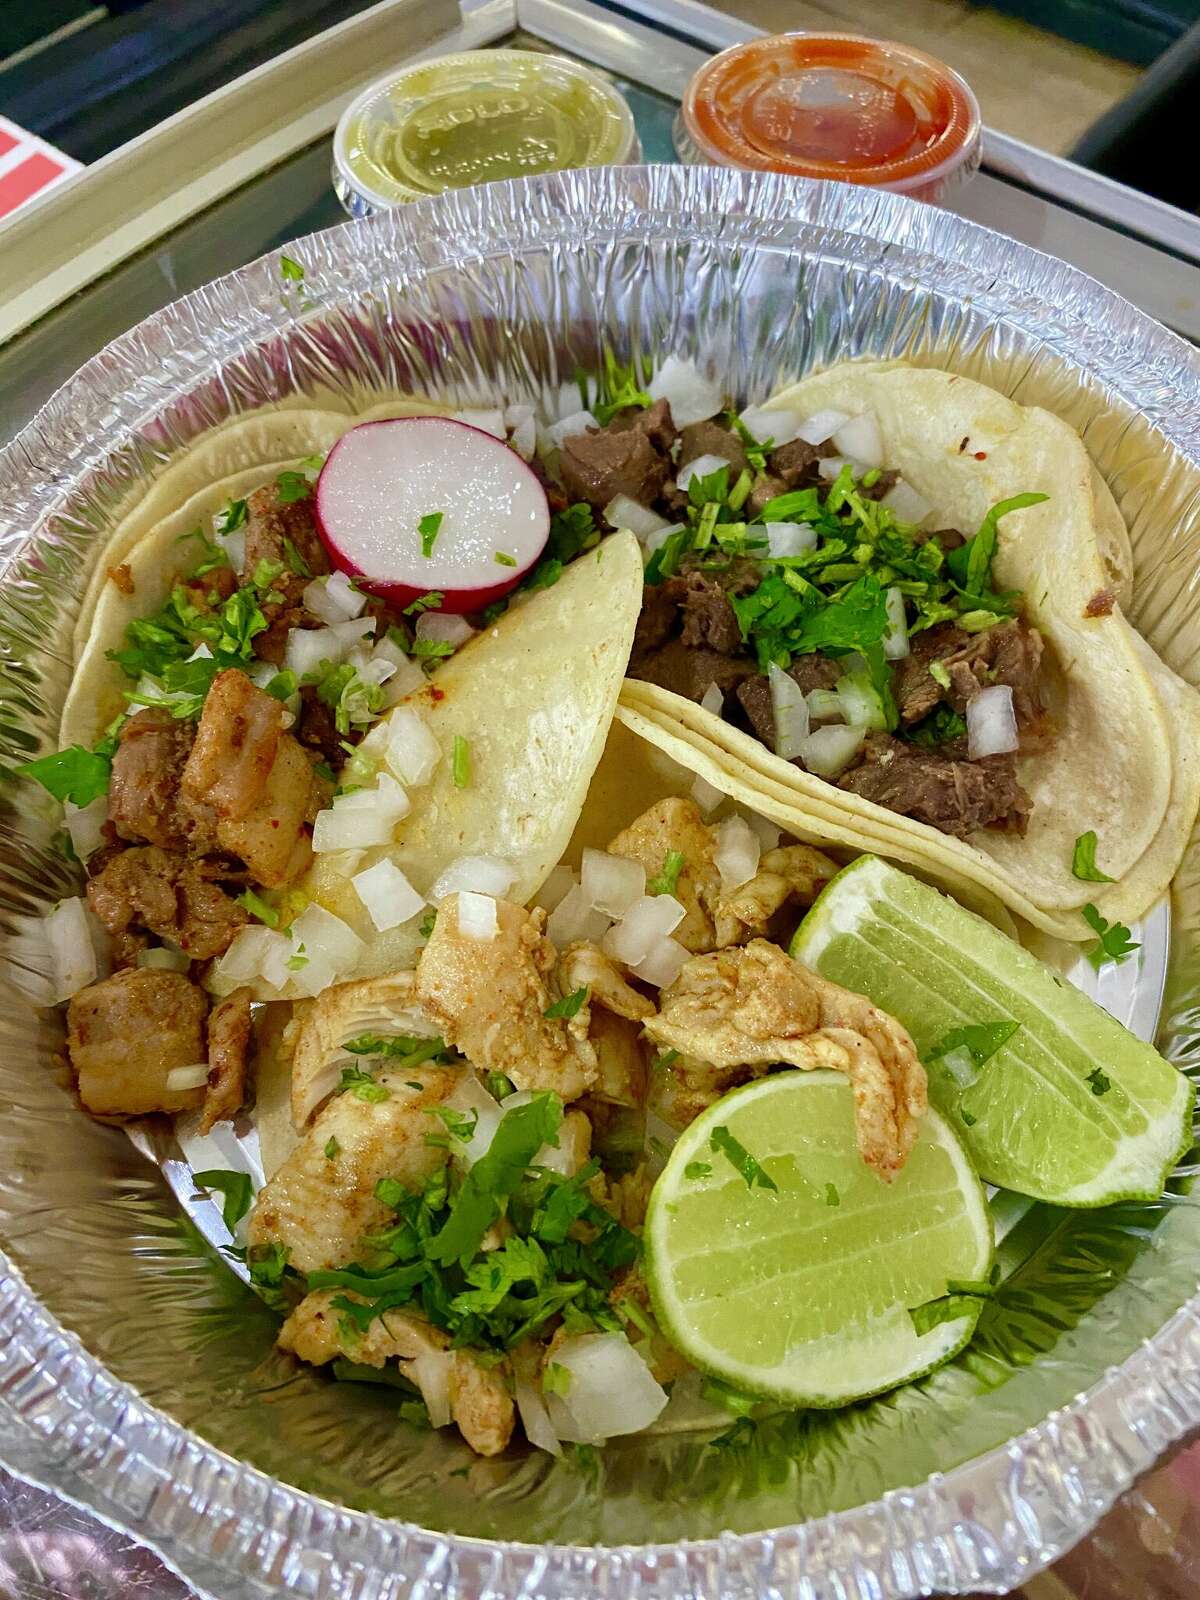 Two meat-filled tacos topped with radish and onions sits in a foil container, with sides of sliced limes and a side dish